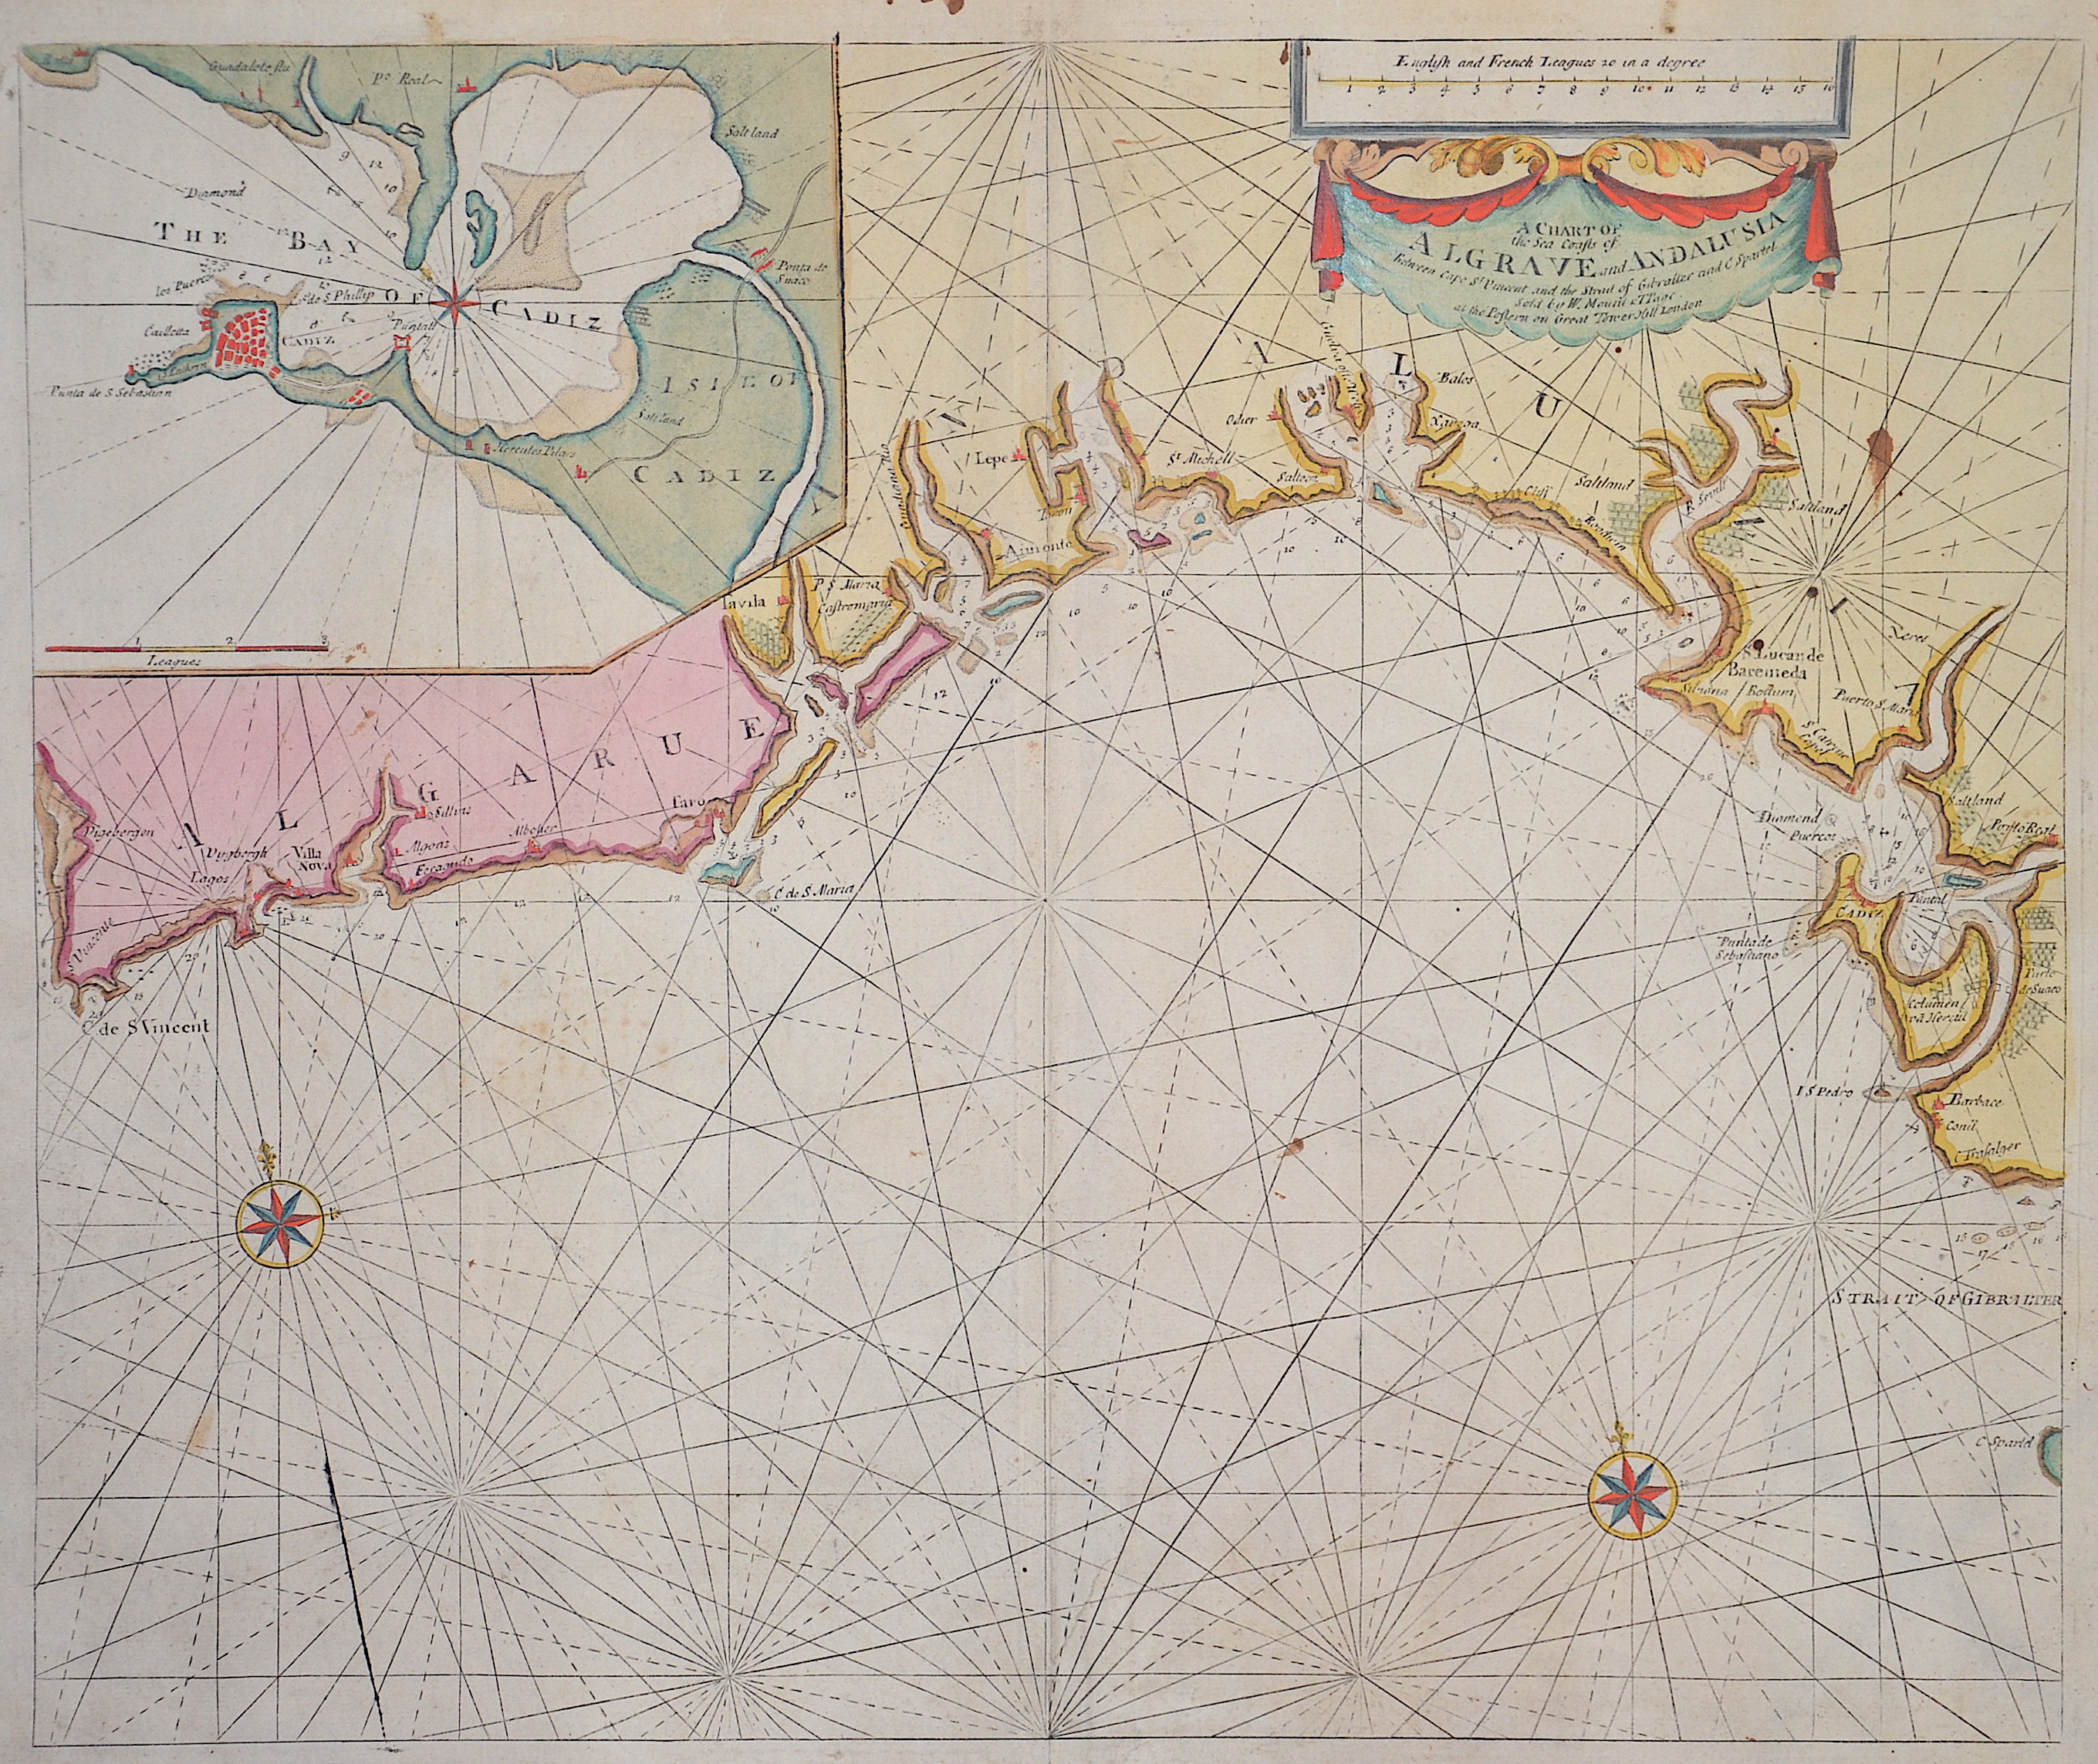 Keulen Johannes van A Carte of the See Coast Algrave and Andalusia …